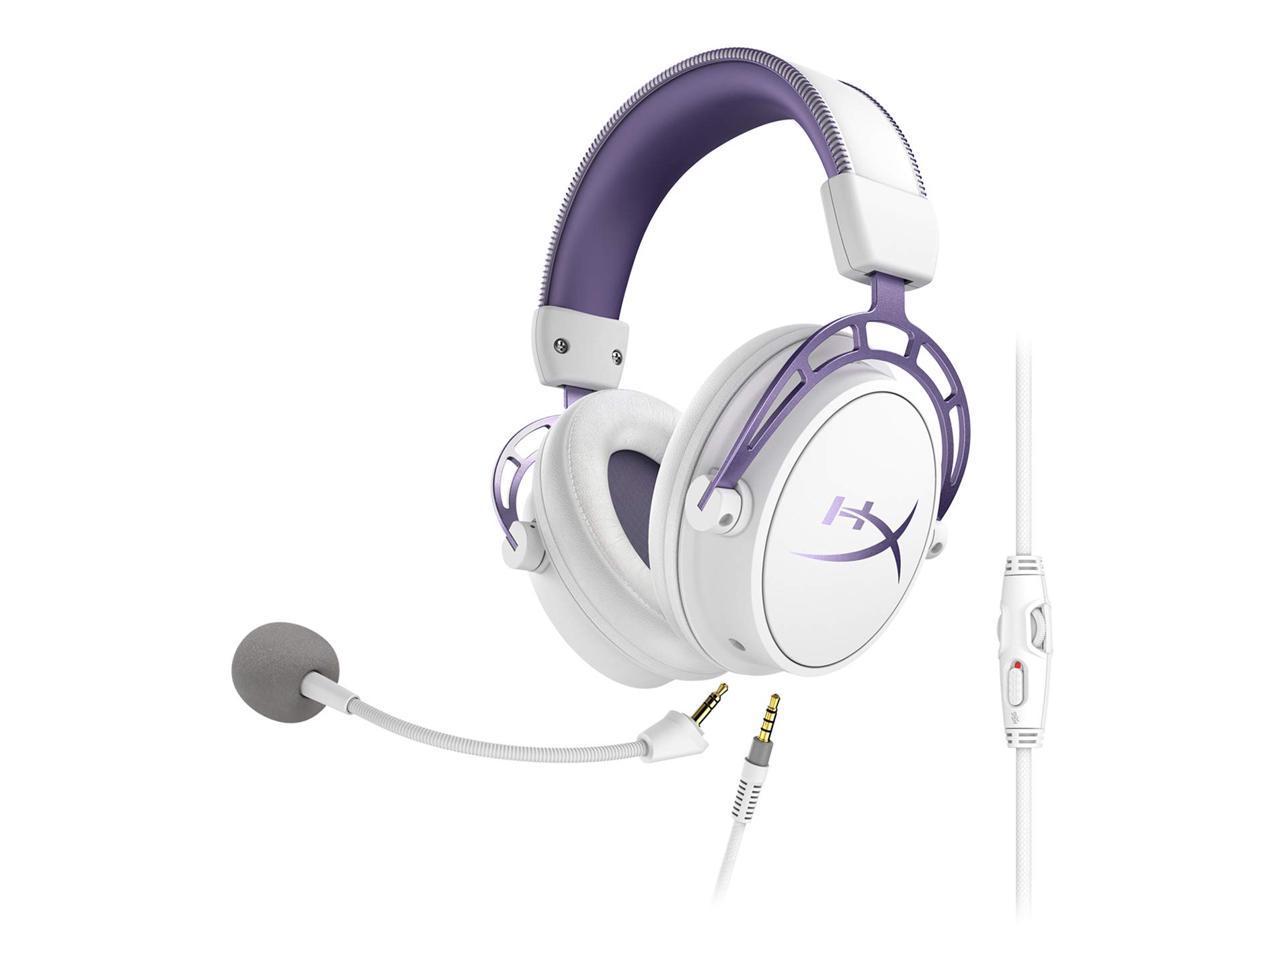 Goodwill Electrificeren Egomania HyperX Cloud Alpha Gaming Headset - White/Purple - Limited Edition for PC,  PS4 & Xbox One, Nintendo Switch - Newegg.com